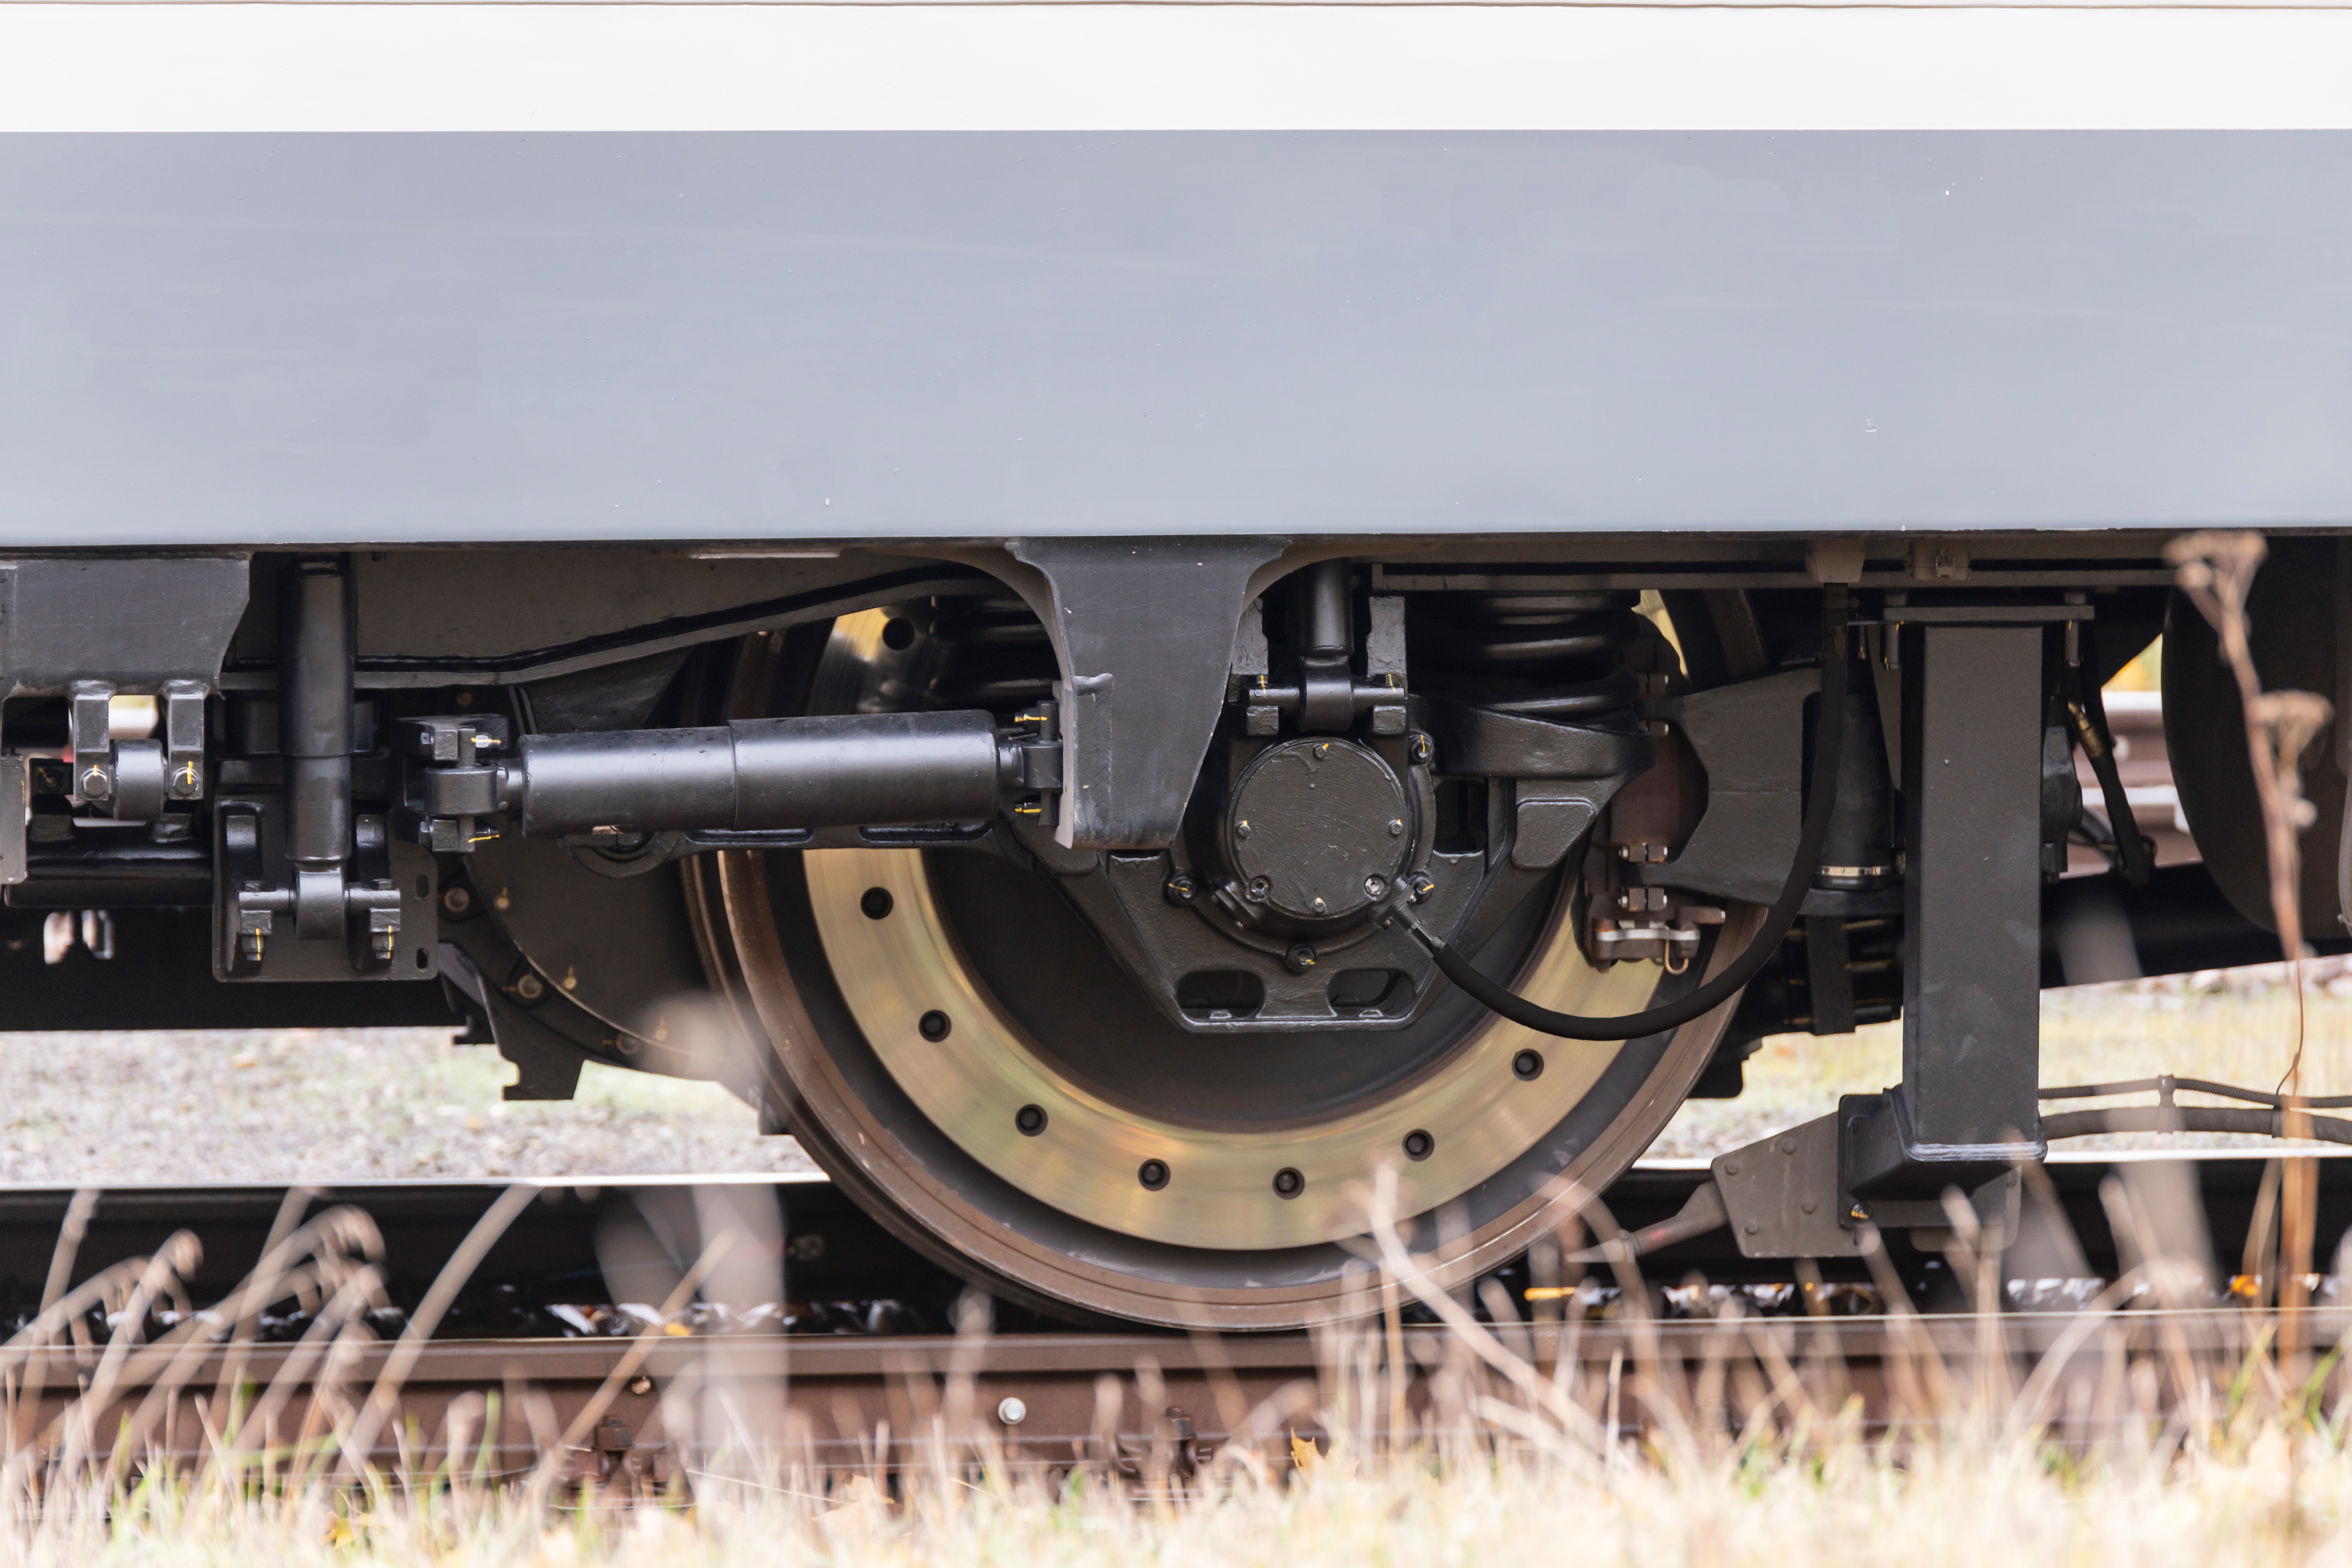 You can see the wheelset of a train from the side on which a speed sensor is installed